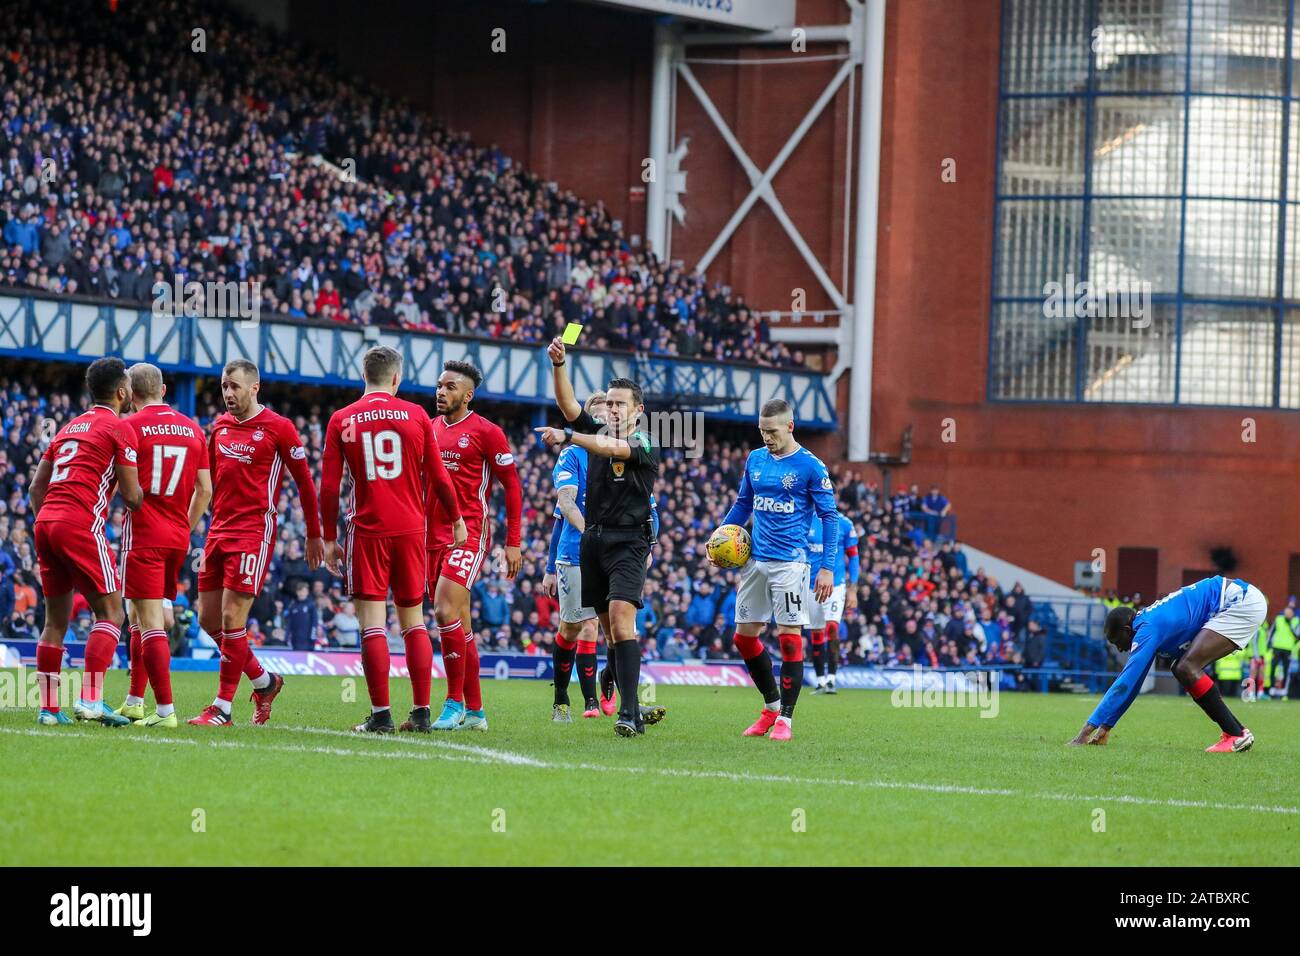 Glasgow, UK. 01st Feb, 2020. Rangers FC played Aberdeen at the Glasgow teams home ground at Ibrox football stadium in a Scottish Premiere League match. The last two games between these teams resulted in a 5 - 0 win for Rangers at Ibrox and a 2 - 2 draw at Pittodrie, Aberdeen's home ground, so in league points this is an important game for both teams. The game finished 0 - 0. Credit: Findlay/Alamy Live News Stock Photo